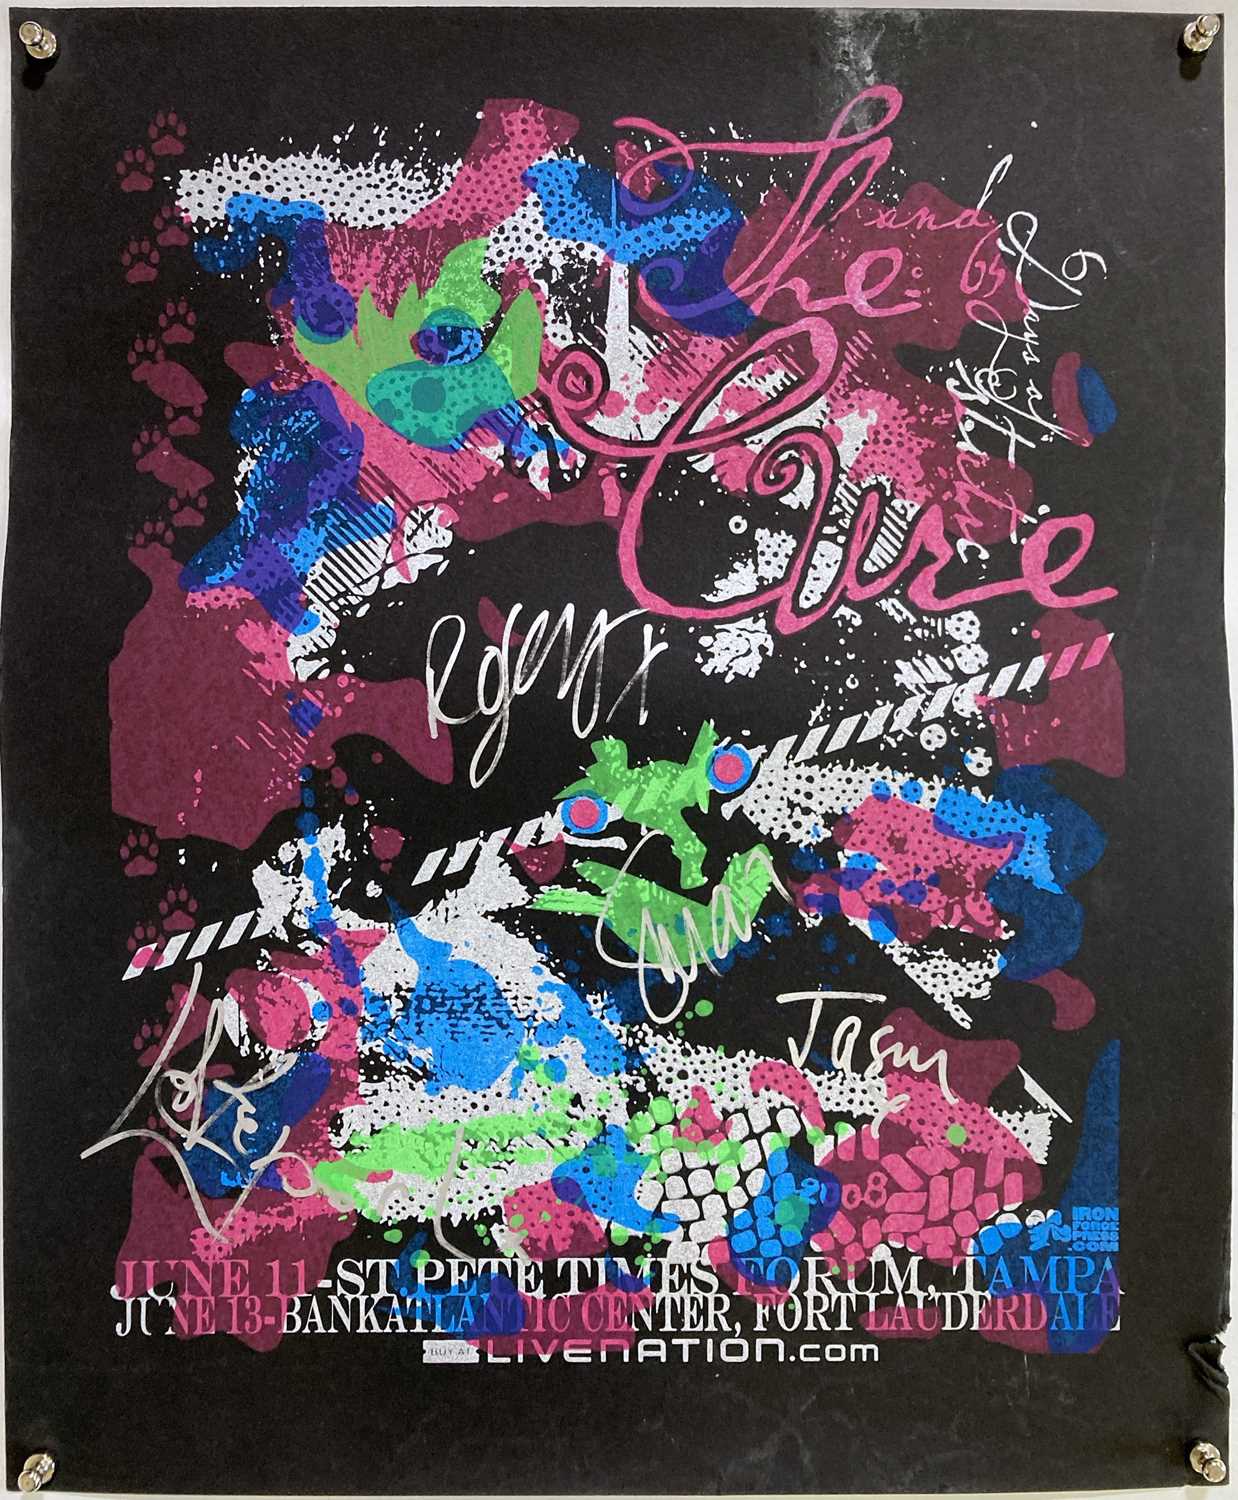 Lot 307 THE CURE SIGNED TAMPA CONCERT POSTER.